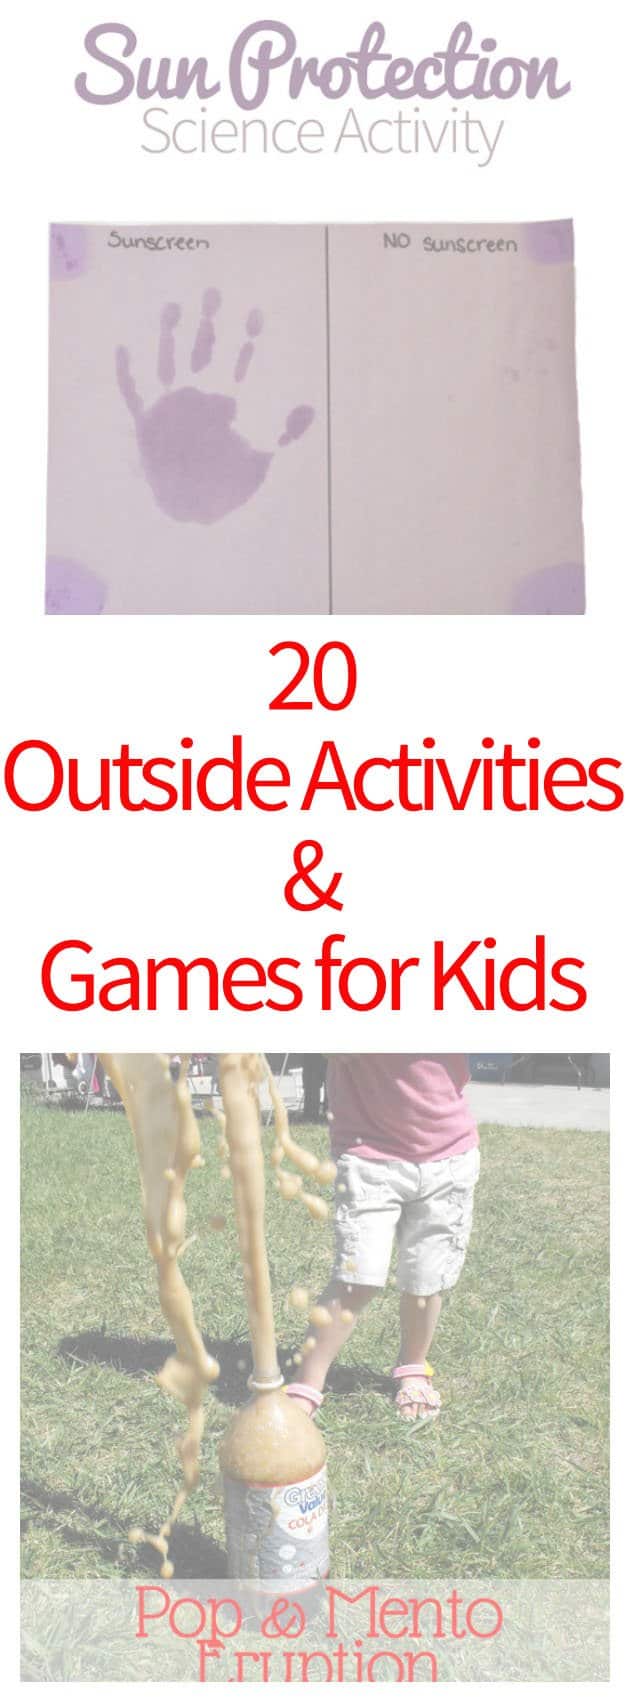 20 Outside Activities & Games for Kids